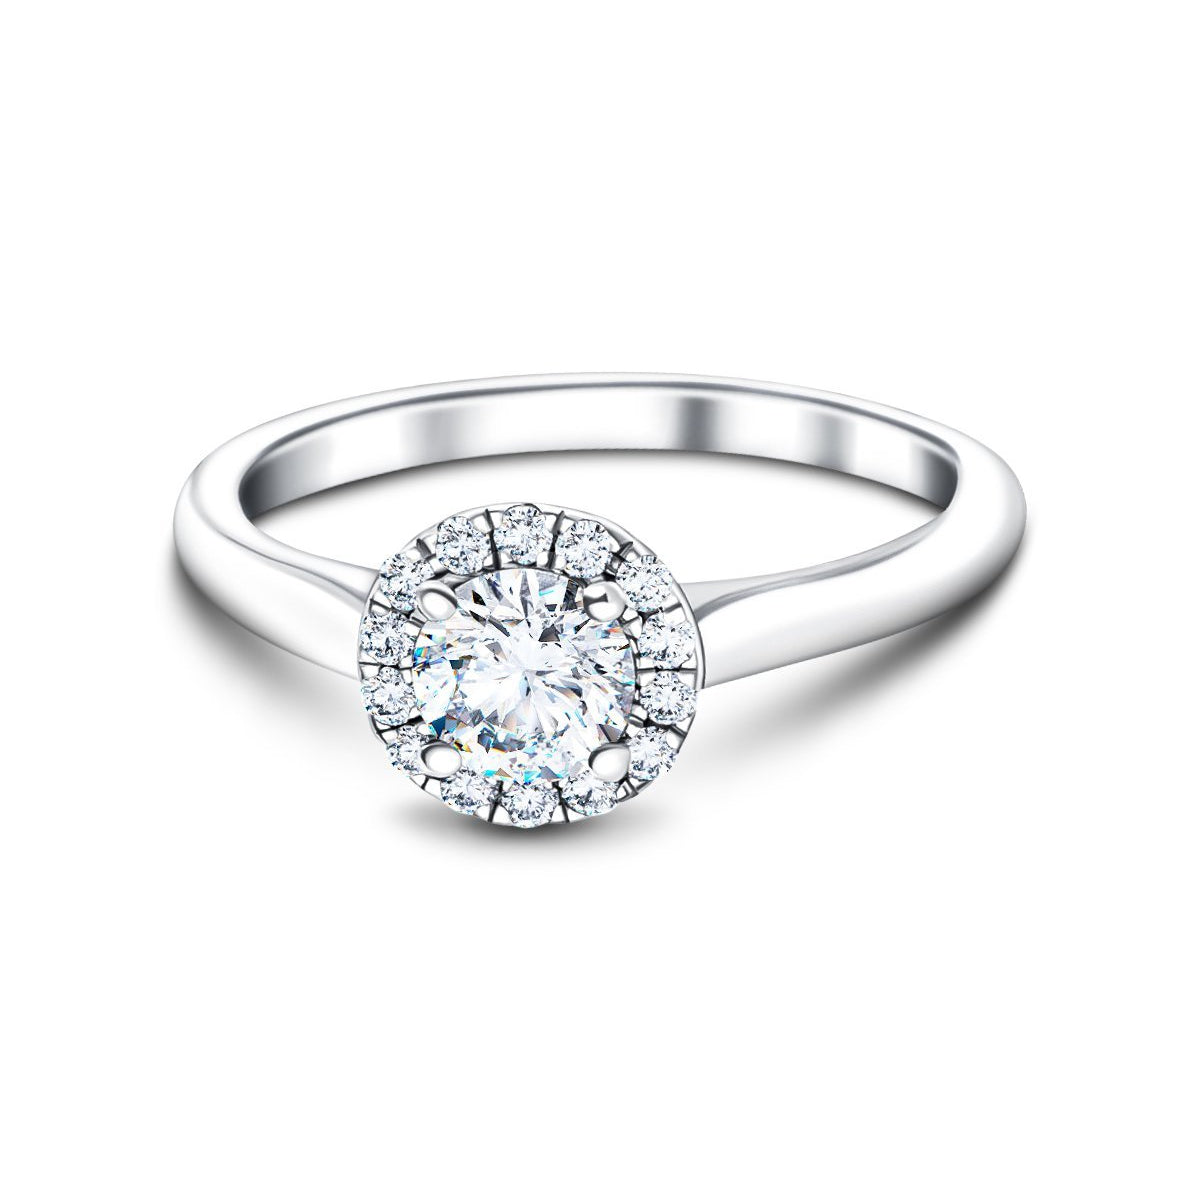 Halo Diamond Engagement Ring with 1.00ct G/SI in 18k White Gold - All Diamond